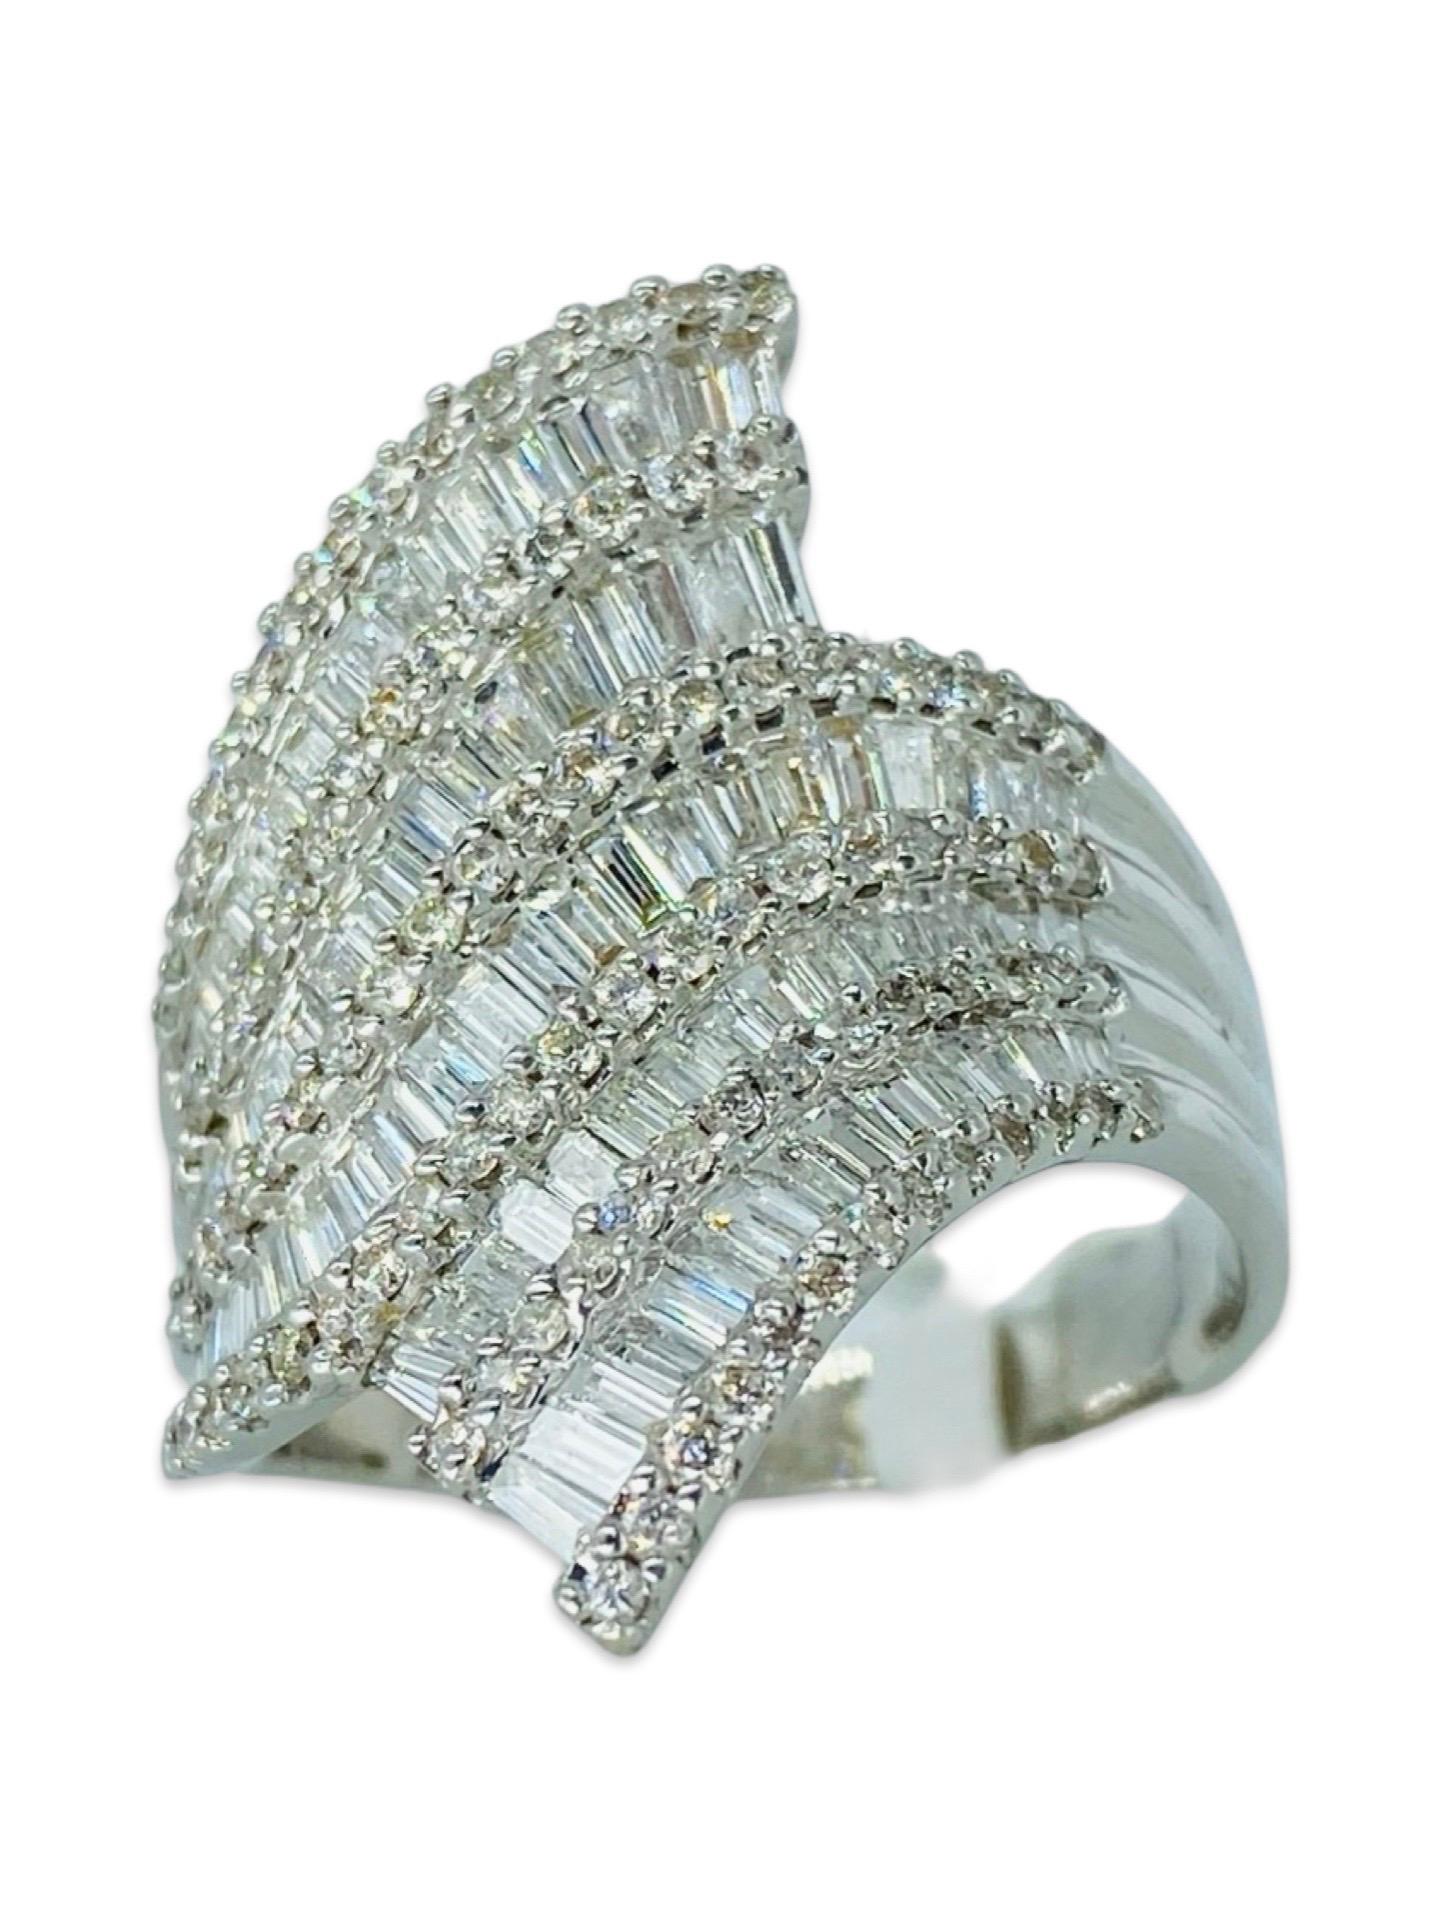 Signed 2.51 Carat Baguette Cut Diamonds 5-Row Ring 18k White Gold For Sale 1